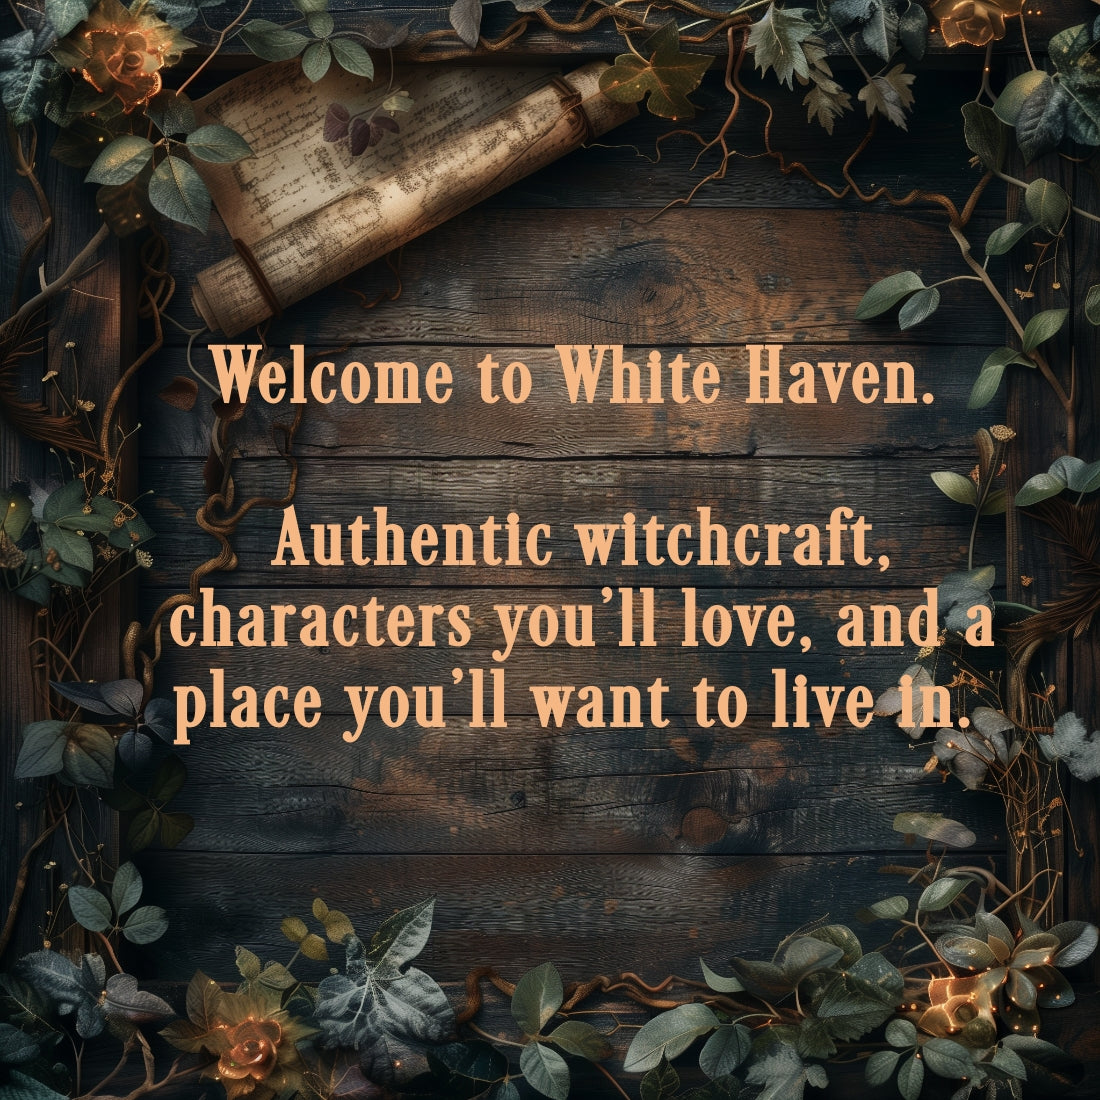 White Haven Witches, paranormal mysteries, magic, witchcraft, urban fantasy, supernatural, magical realism.